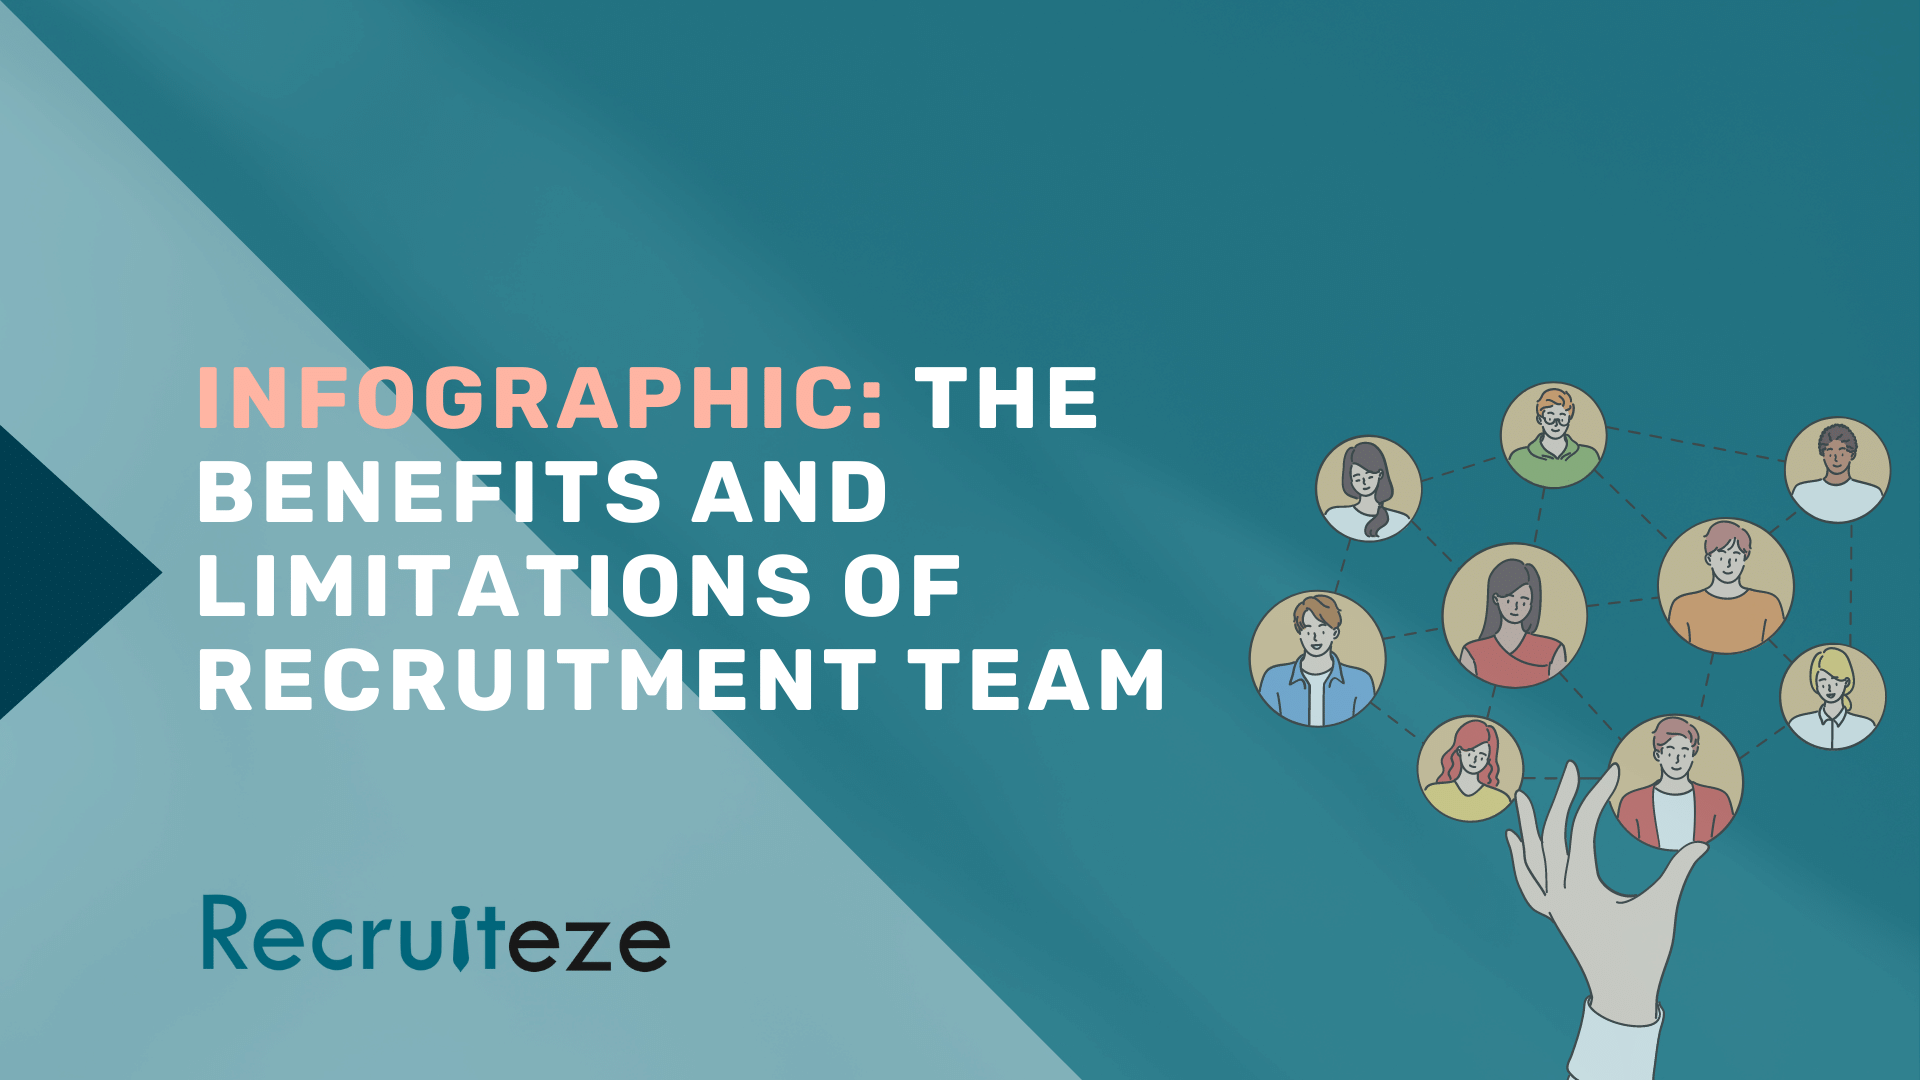 The Benefits and Limitations of Recruitment Team